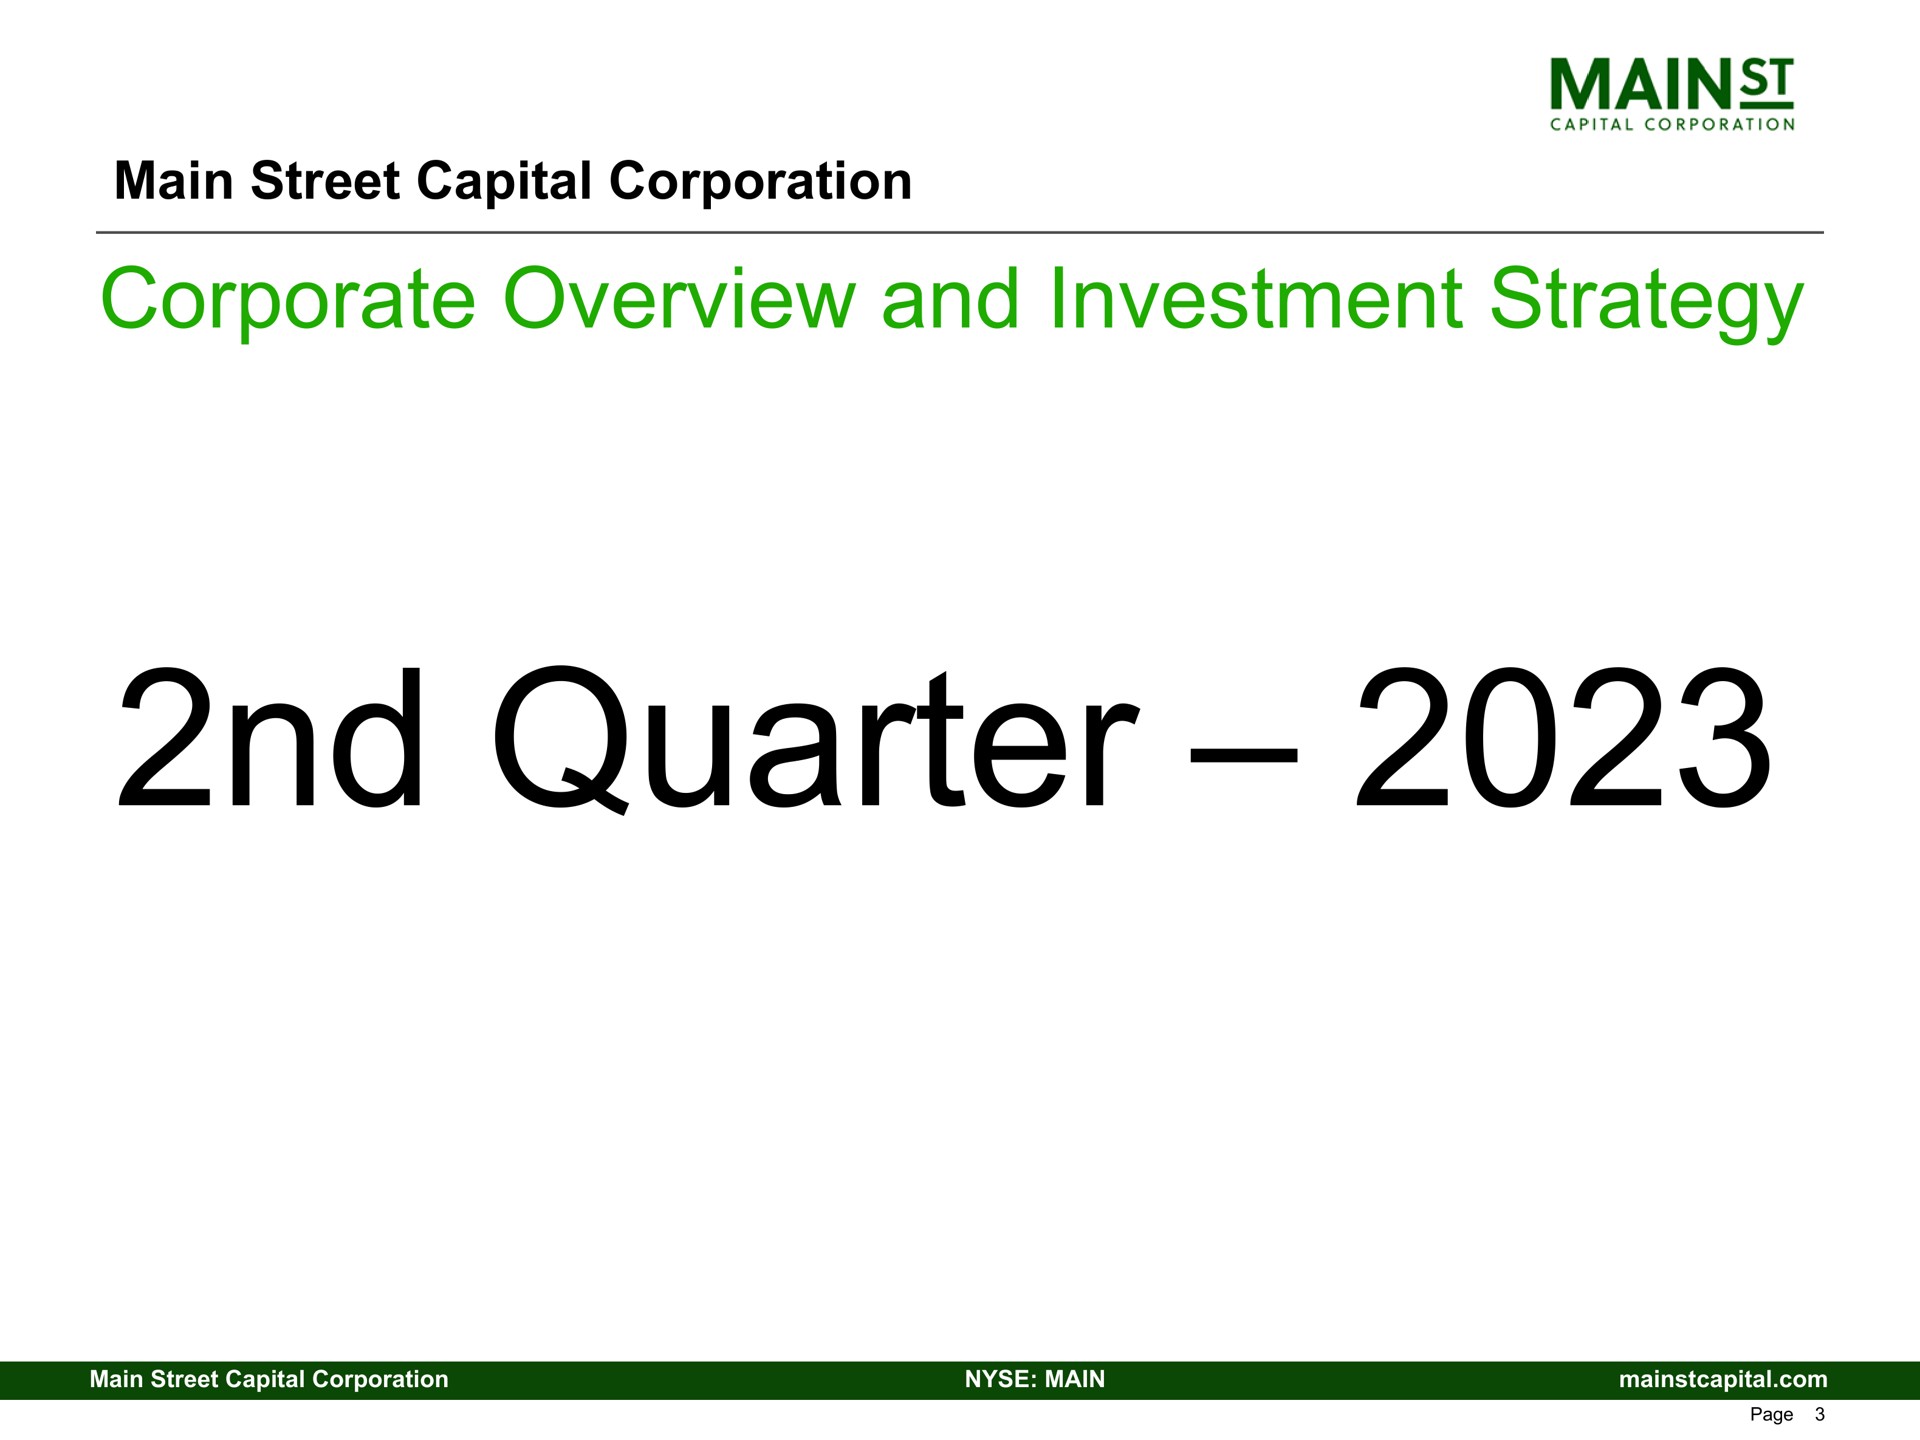 main street capital corporation corporate overview and investment strategy quarter | Main Street Capital